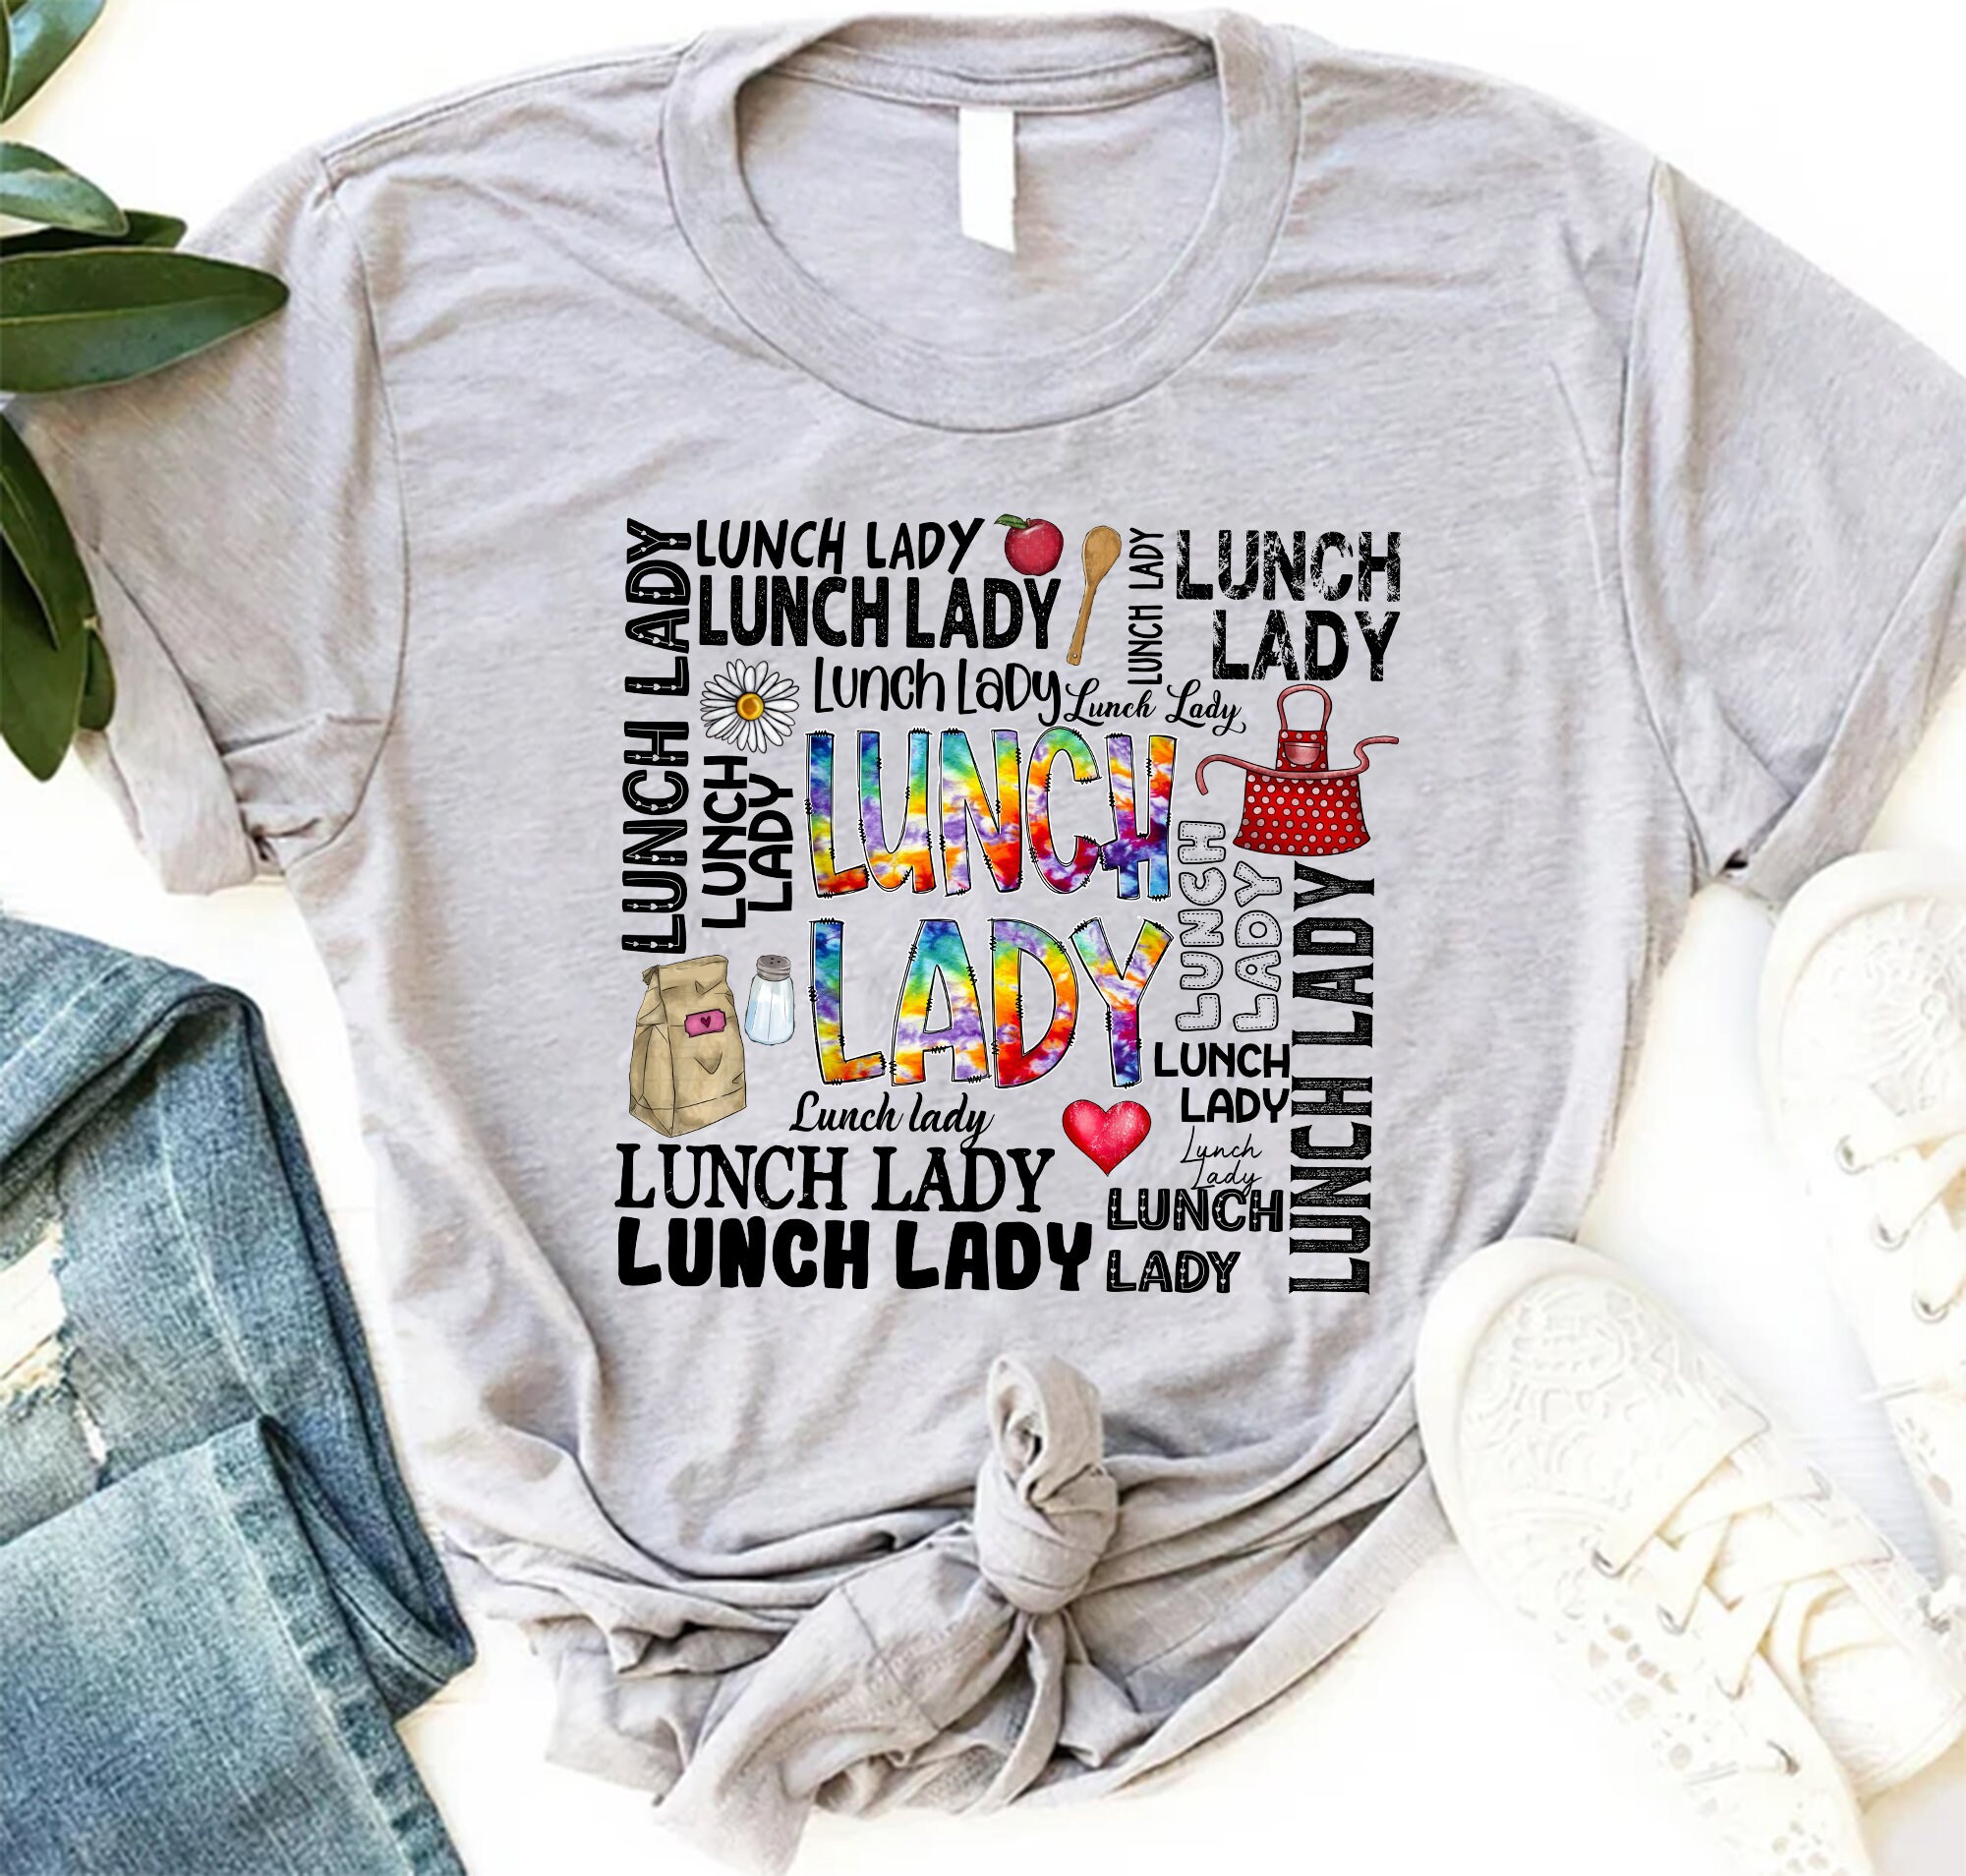 Discover Lunch Lady Shirt, Lunch Lady Gift, Lunch Lady Tee, Cafeteria Worker, School Cafeteria, Lunch Lady Life, Cafeteria Team Shirts